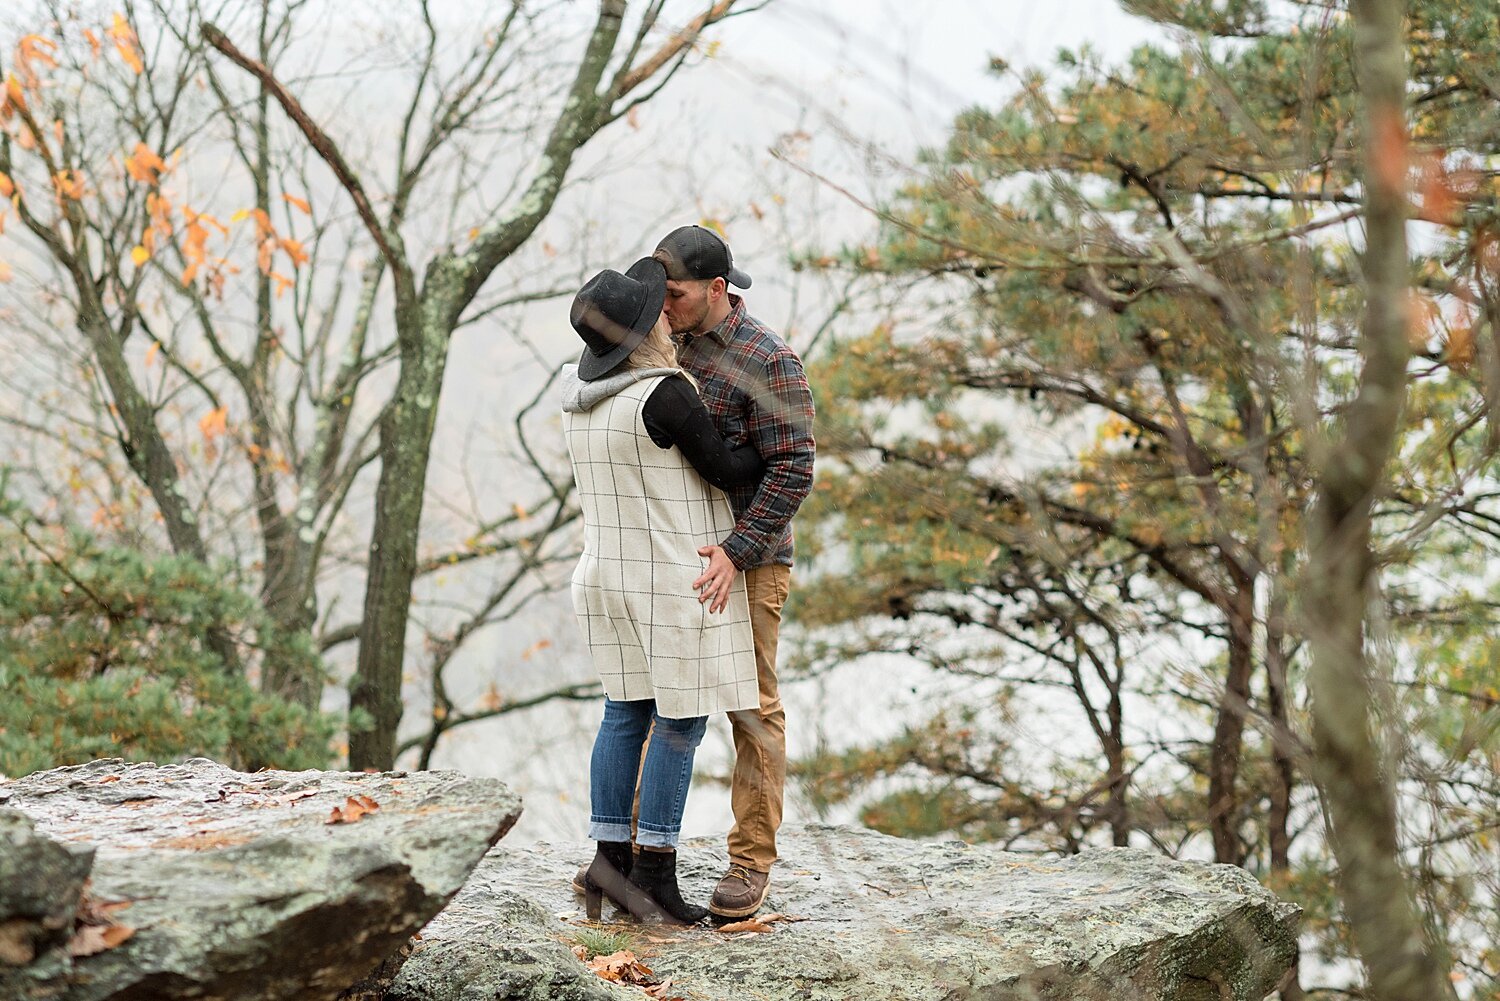 Pinnacle Overlook Holtwood PA Surprise Proposal Photography_8731.jpg